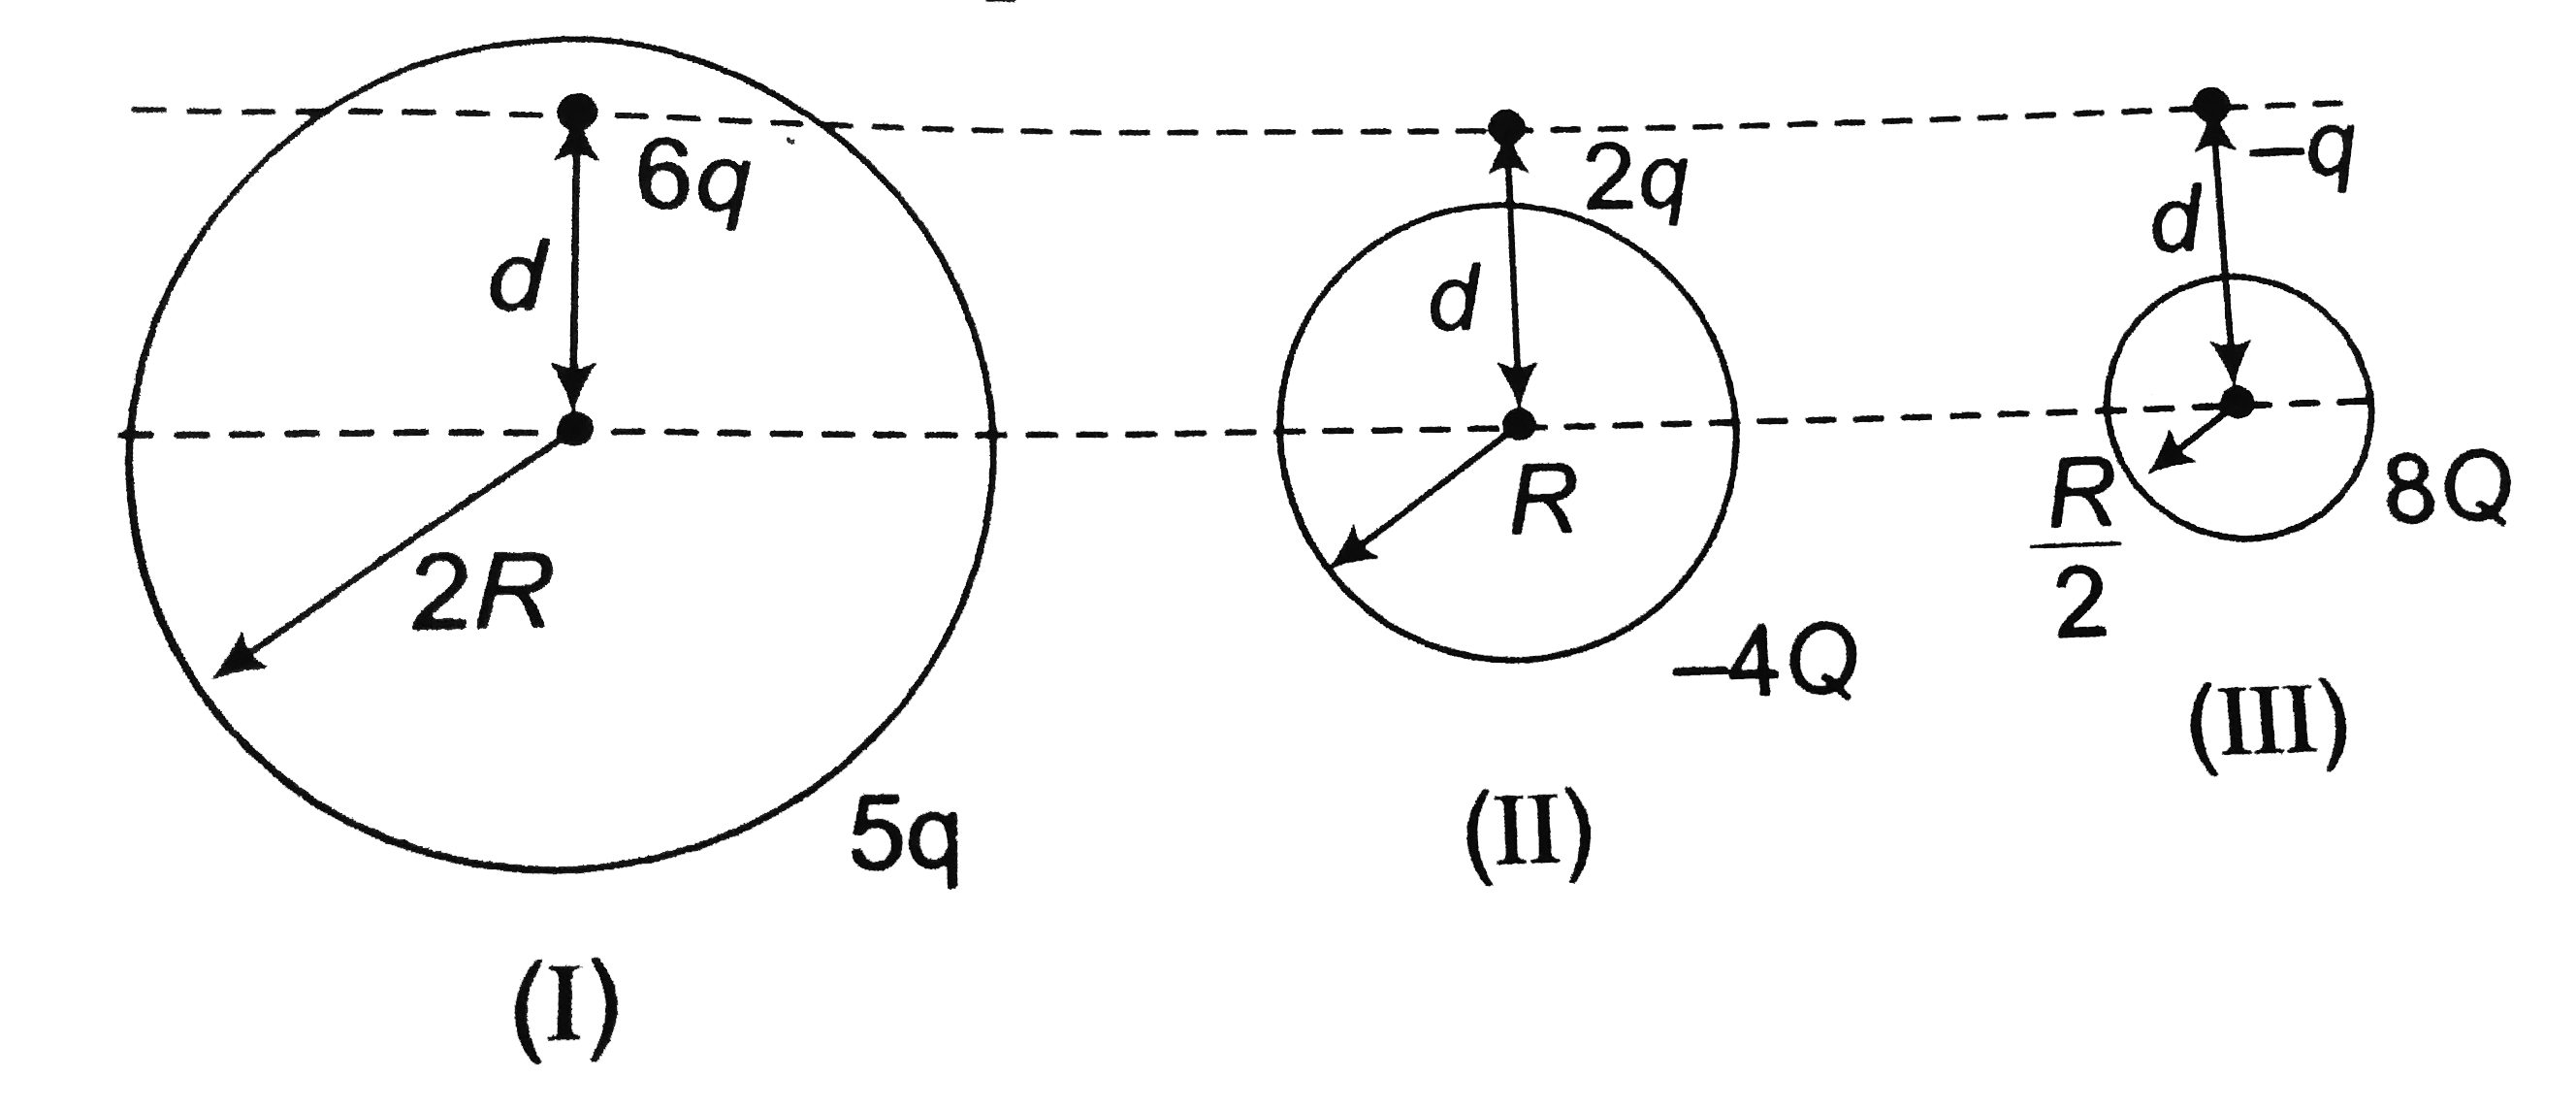 Figure, shown above, shows three situations involving a charged particle and a uniformly charged spherical shell. The charges and radii of the shells are indicated in the figure. If F(1),F(2) and F(3) are the magnitudes of the force on the particle due to the shell in situations (I),(II) and (III) then